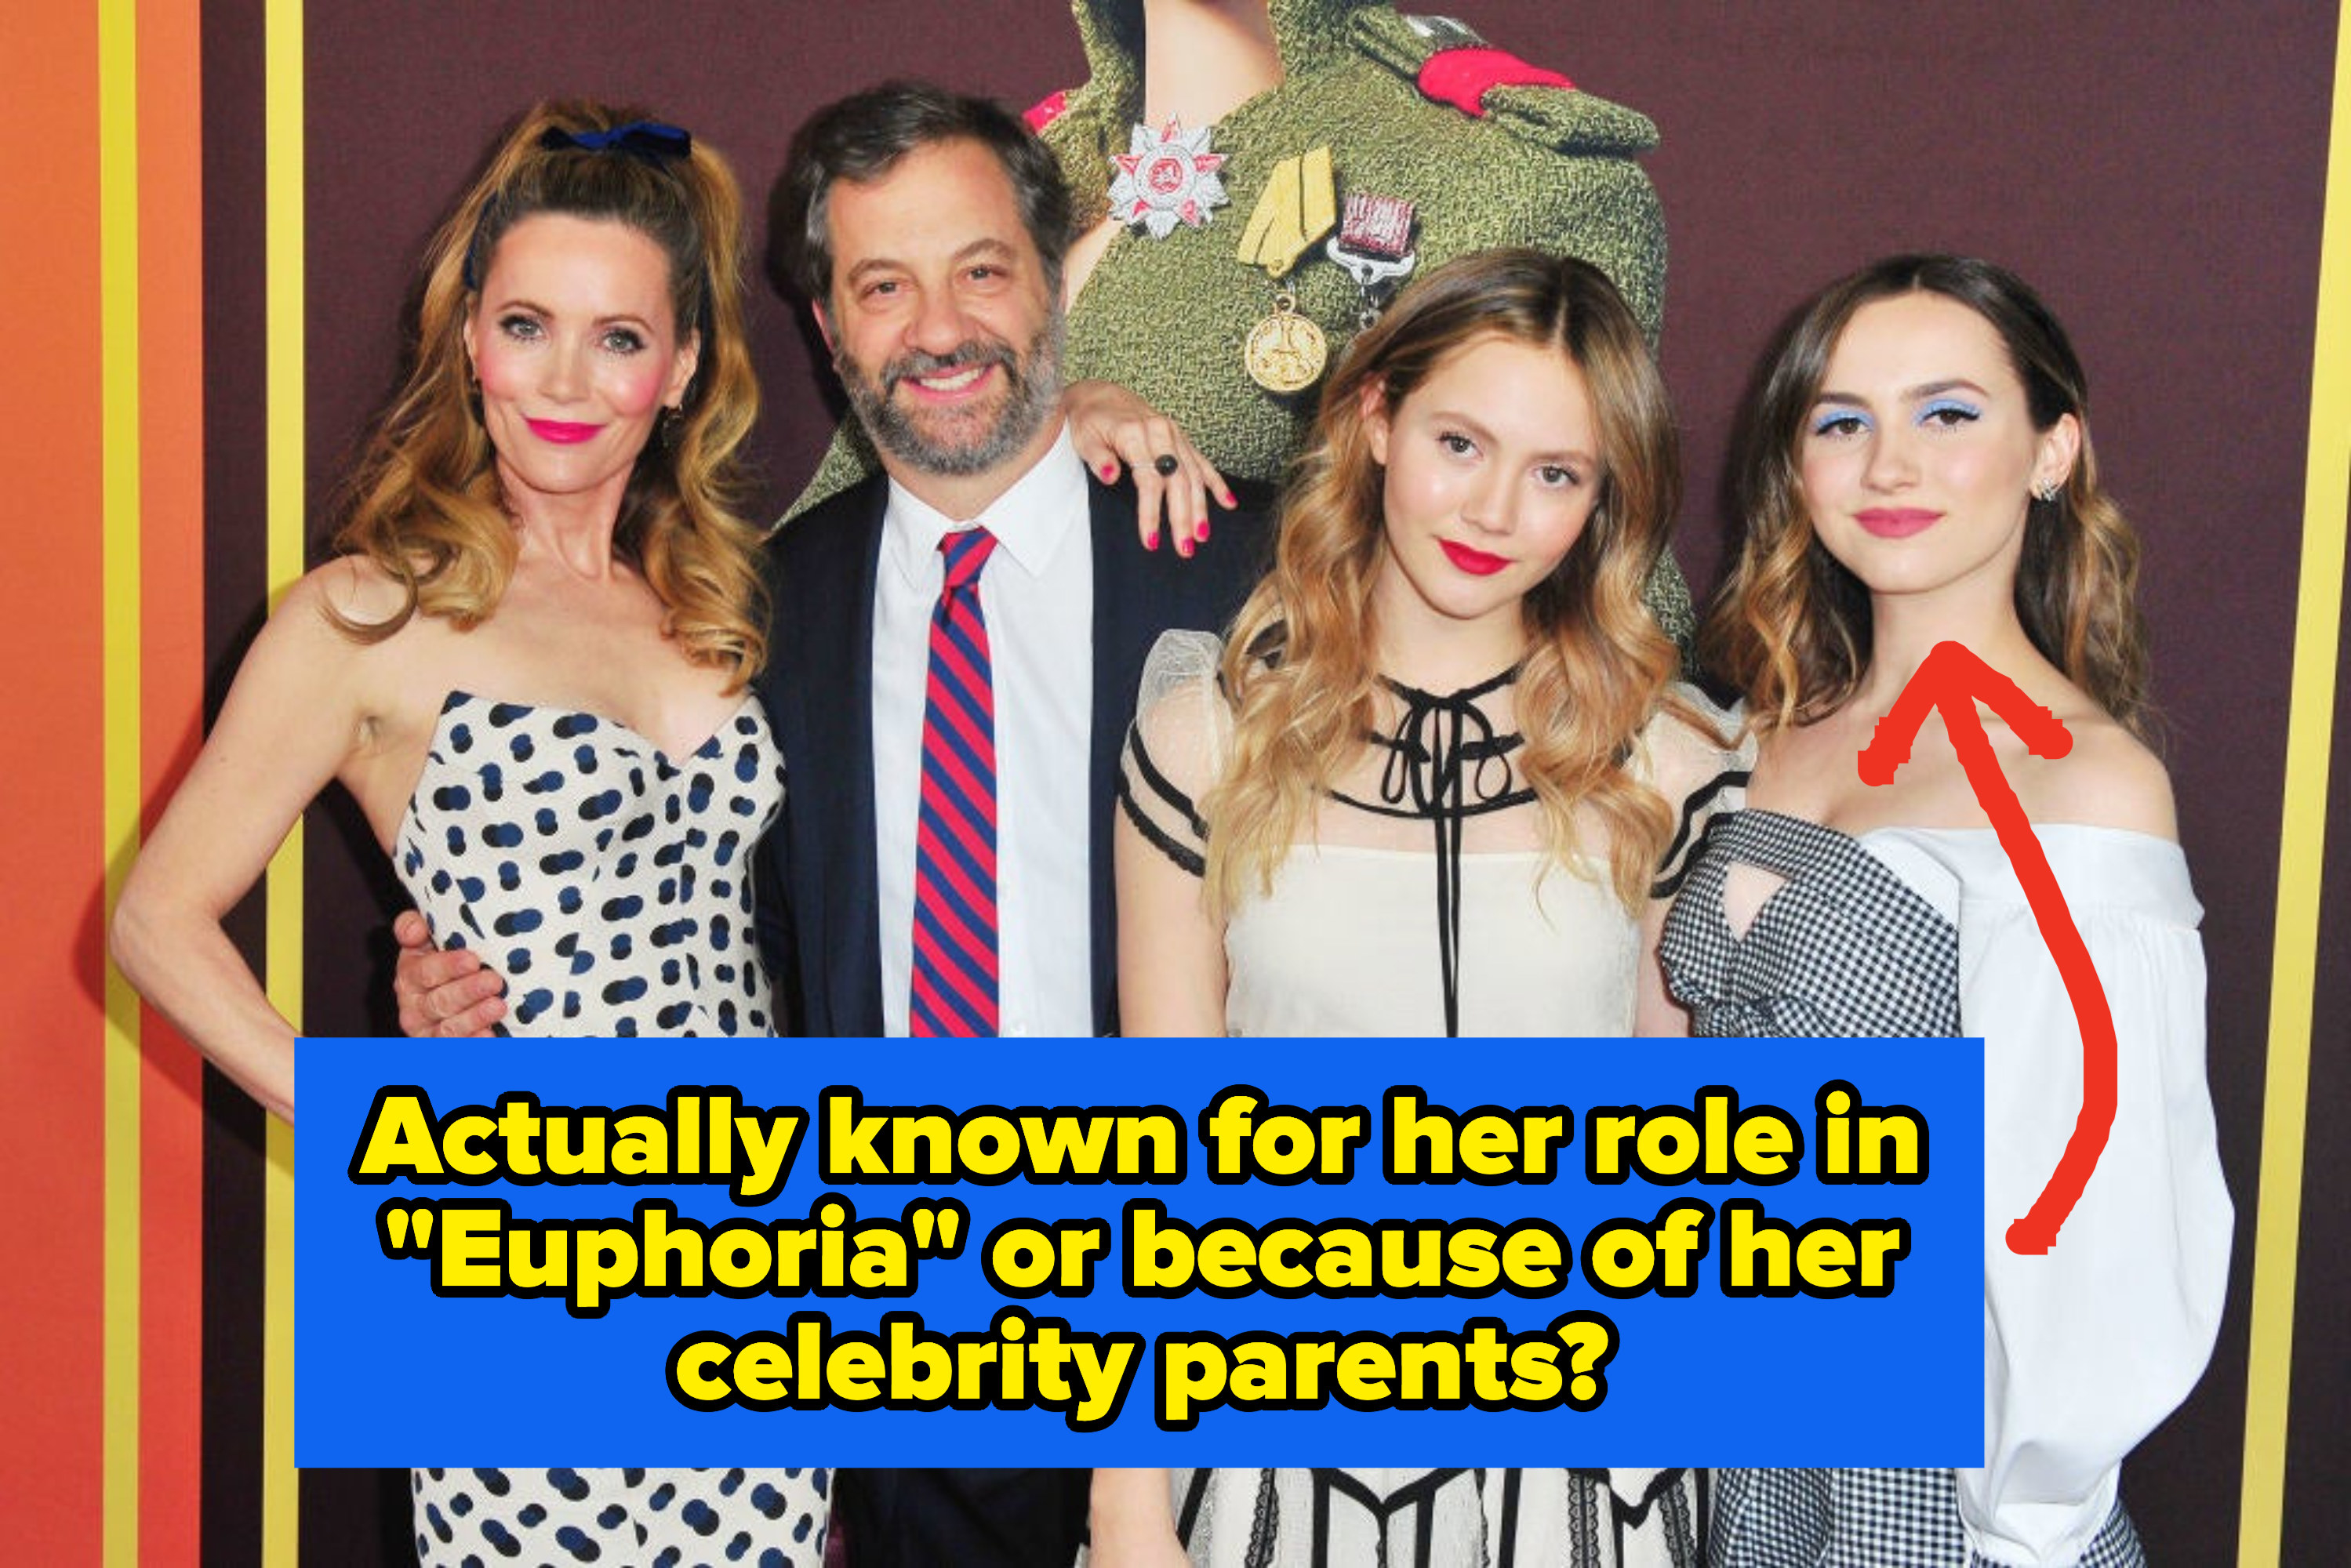 The Apatow family with an arrow to Maude saying &quot;Actually known for her role in Euphoria or because of her celebrity parents